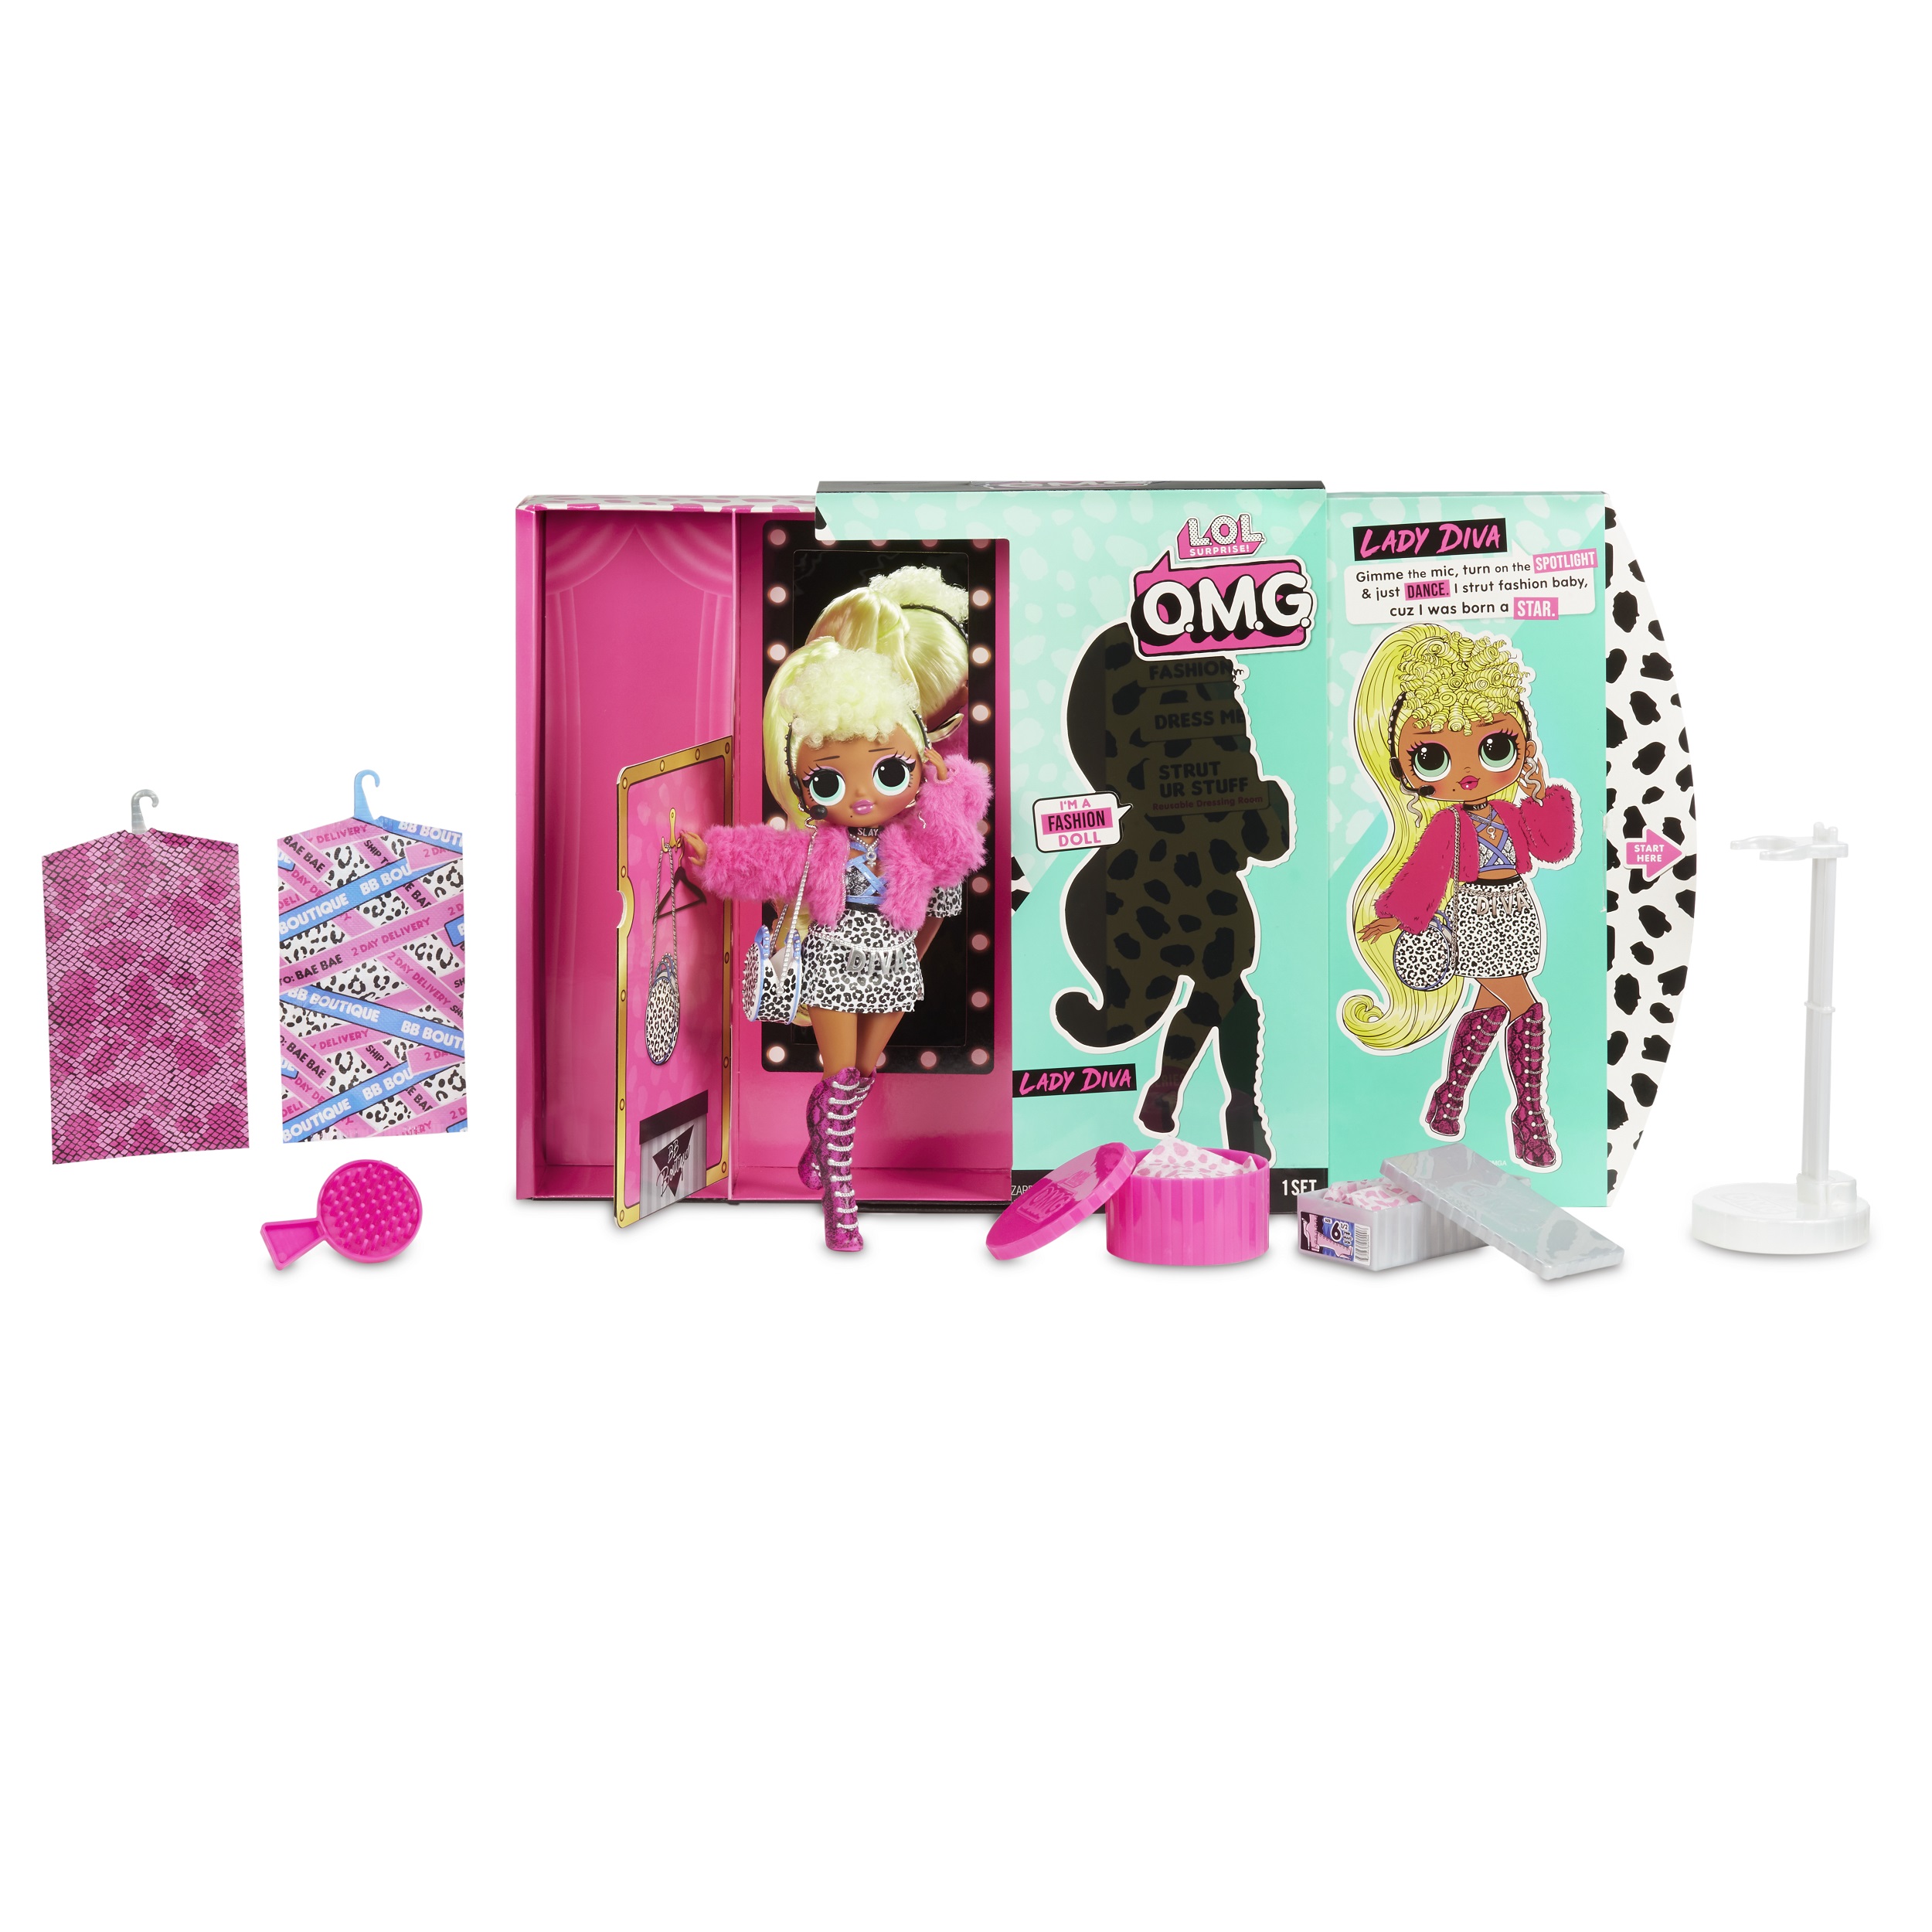 LOL Surprise OMG Lady Diva Fashion Doll With 20 Surprises, Great Gift for Kids Ages 4 5 6+ - image 4 of 6